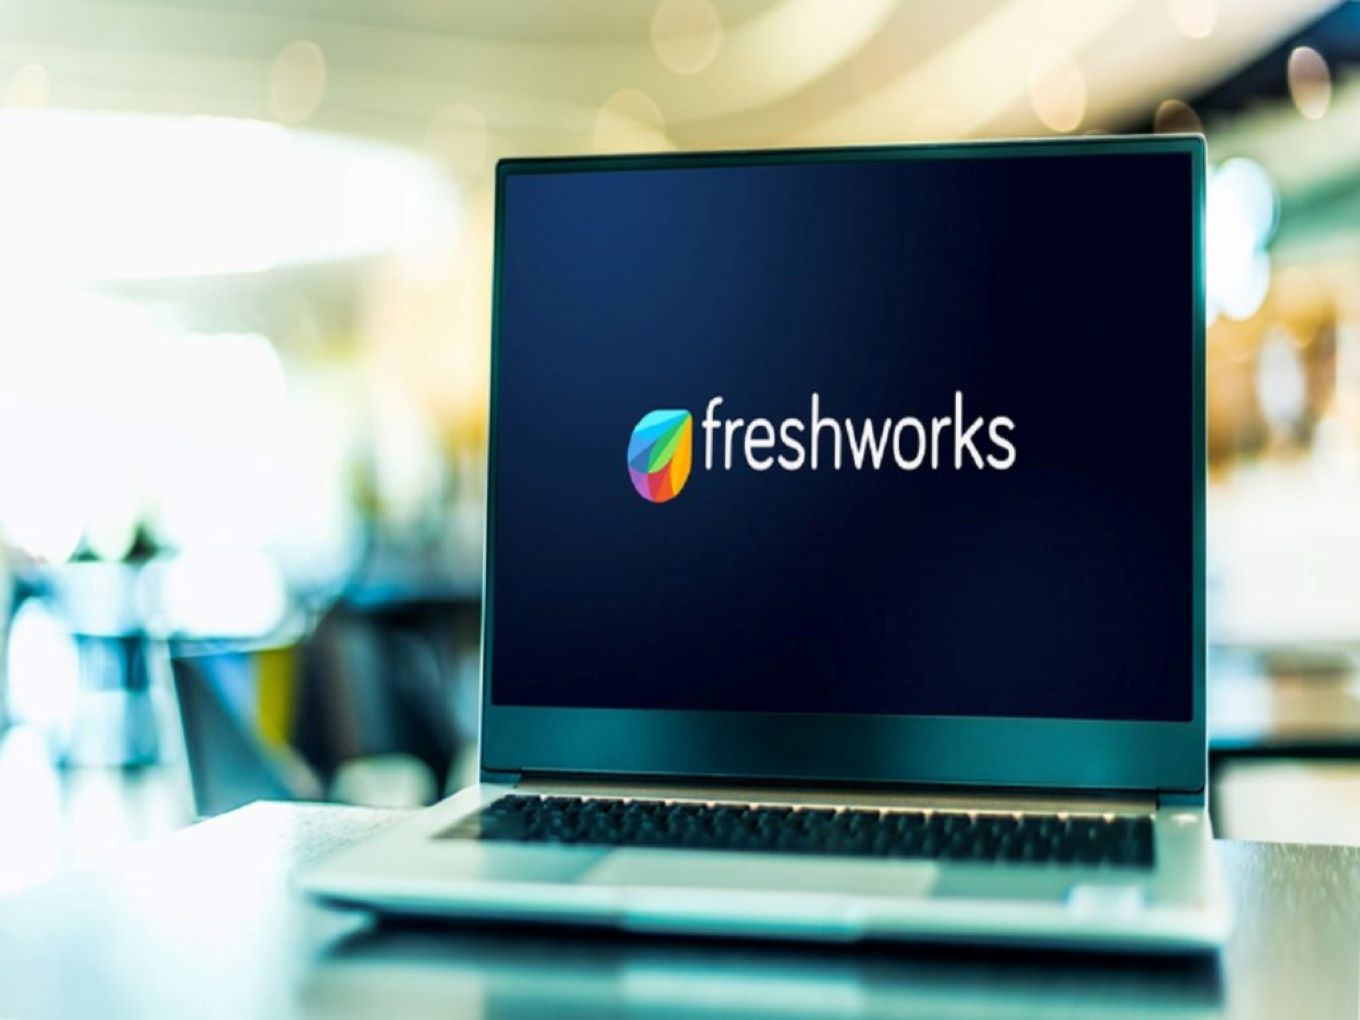 Freshworks Celebrates 1st-Ever Great Operating Profit At $3.9 Mn In Jan-March.